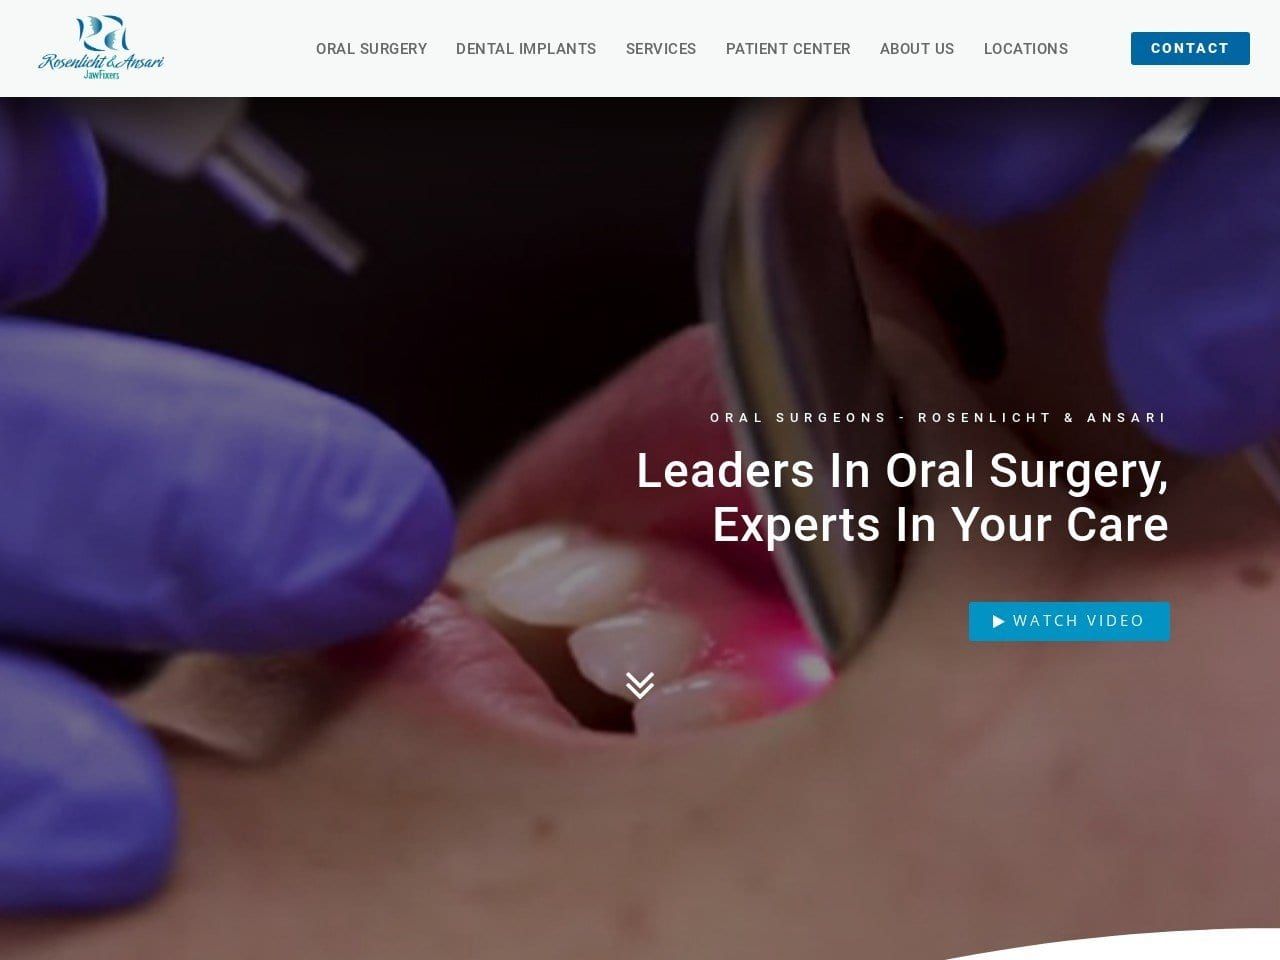 Rosenlicht & Ansari Oral Facial Implant Surgery Ce Website Screenshot from jawfixers.com